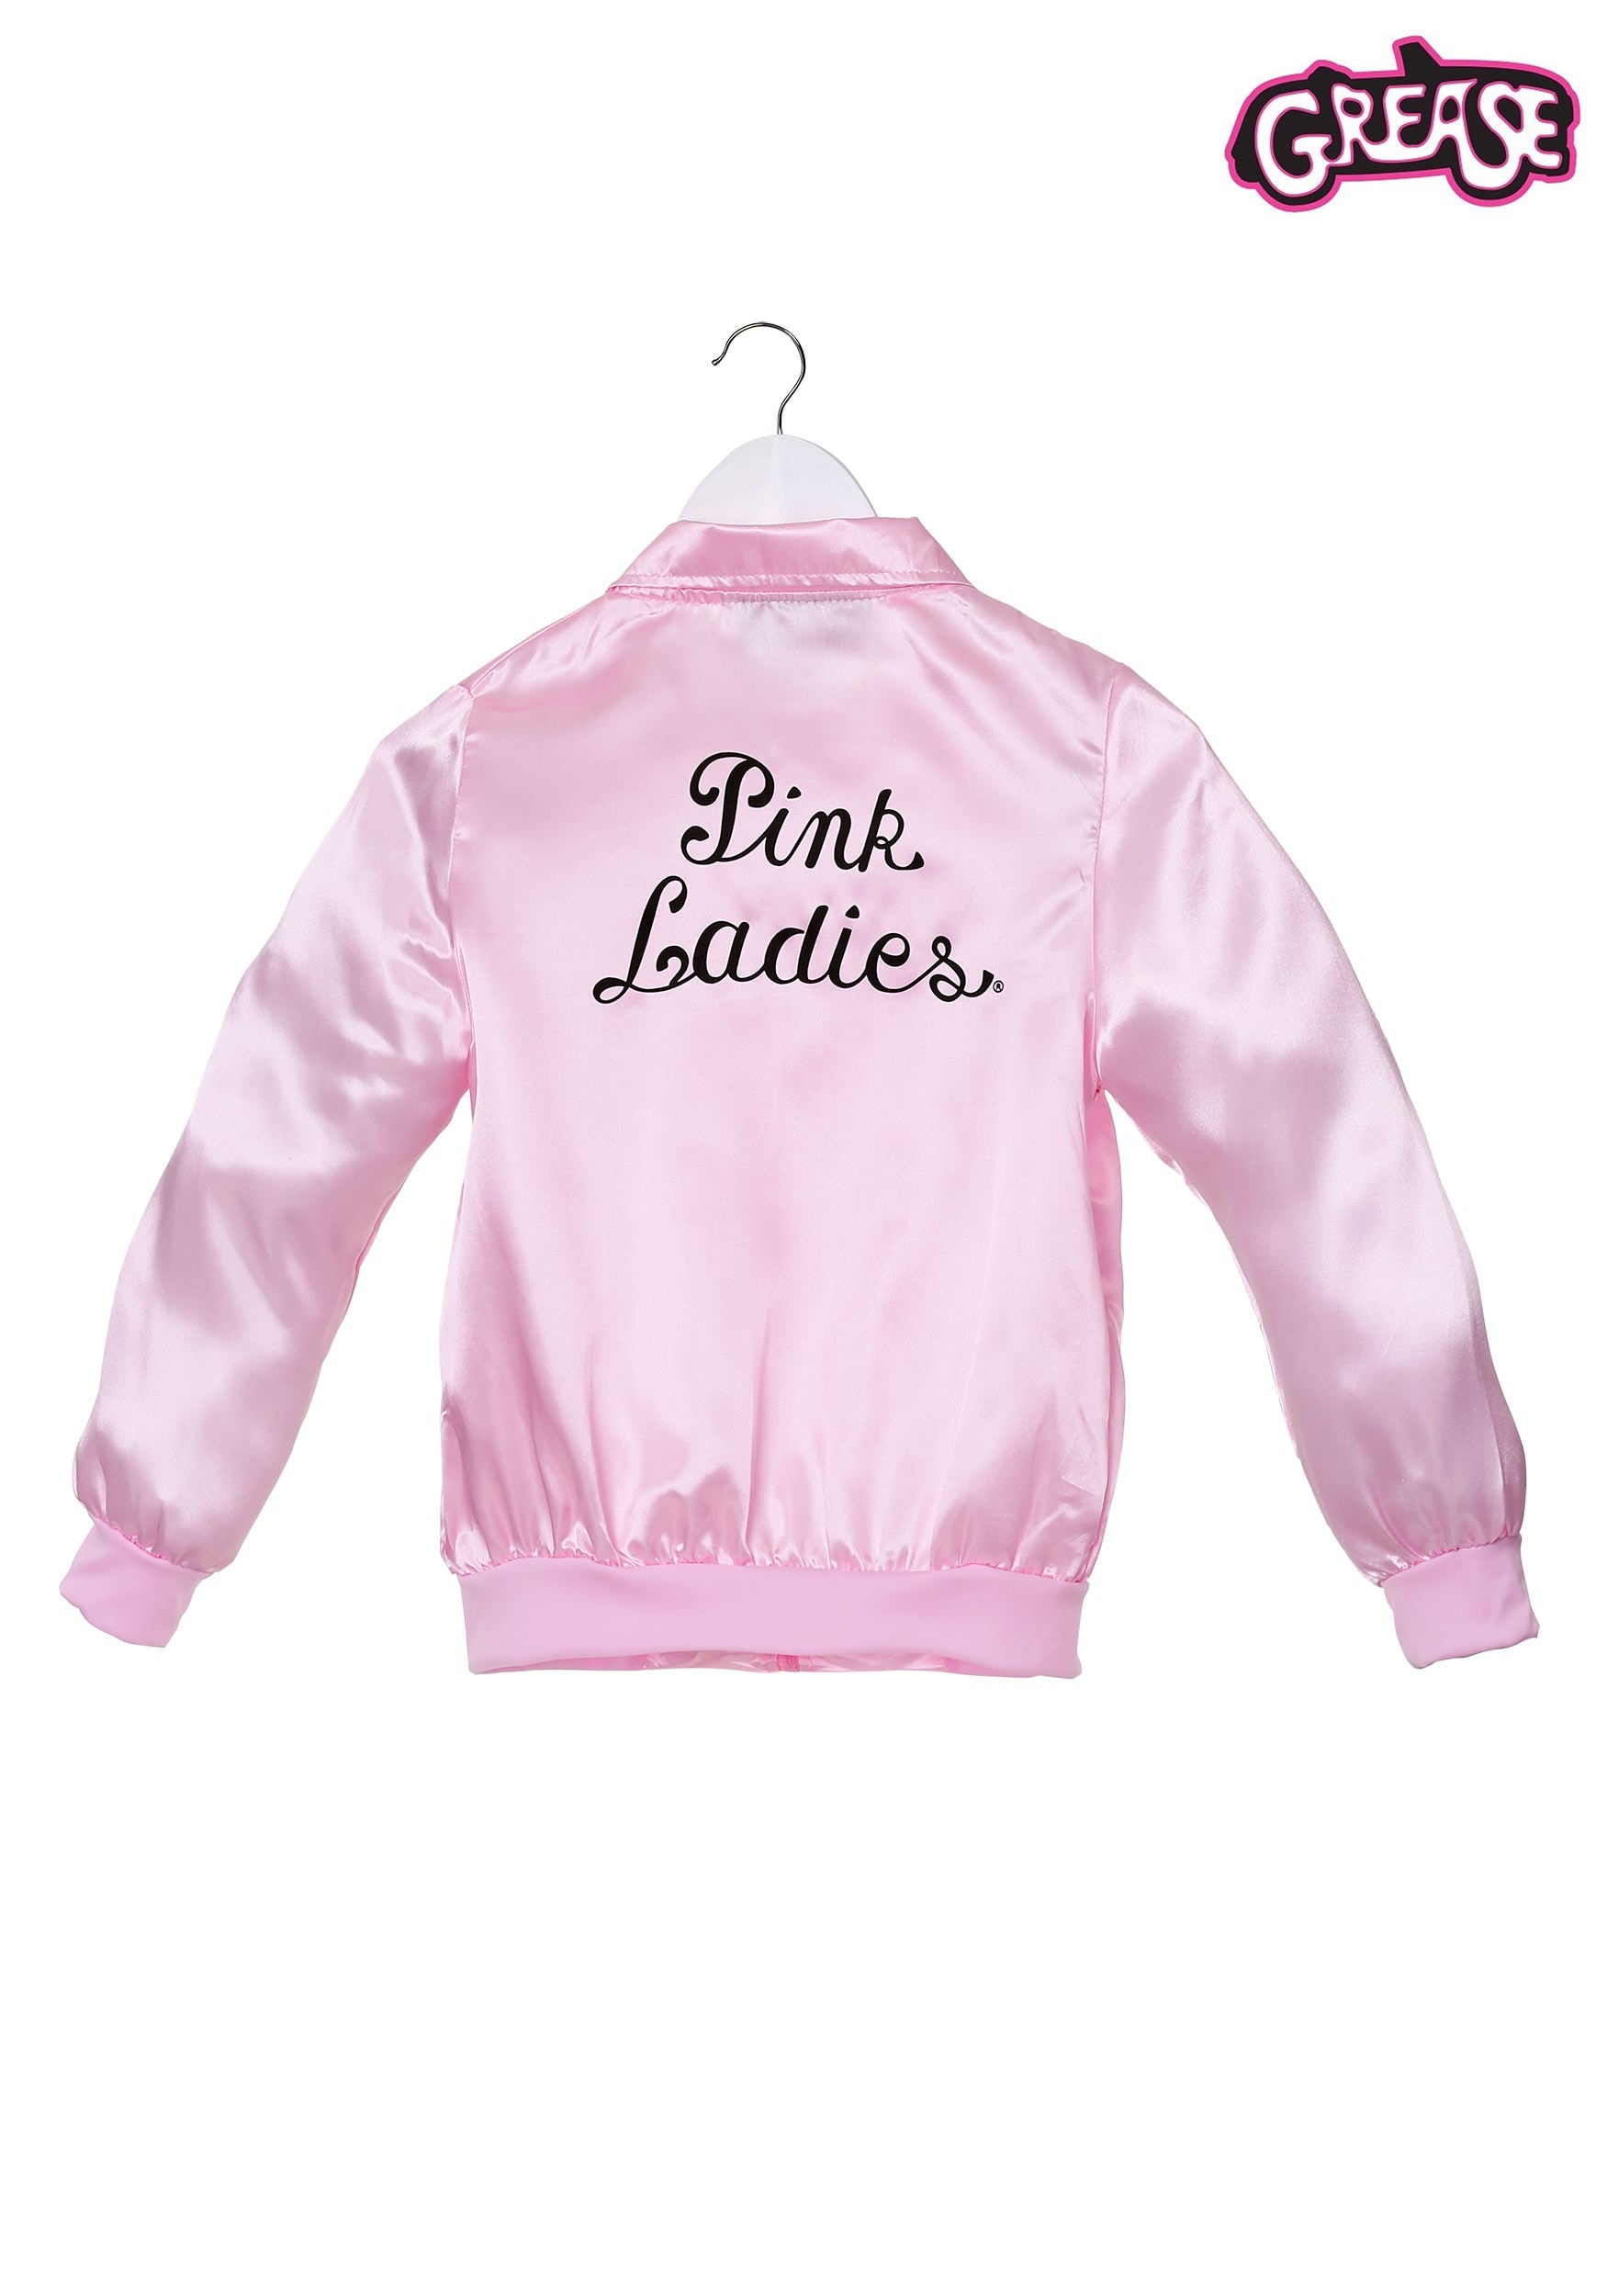 FAYBOX Pink Ladies Jacket Grease 50s Costume for Girls Kids Halloween  Costume